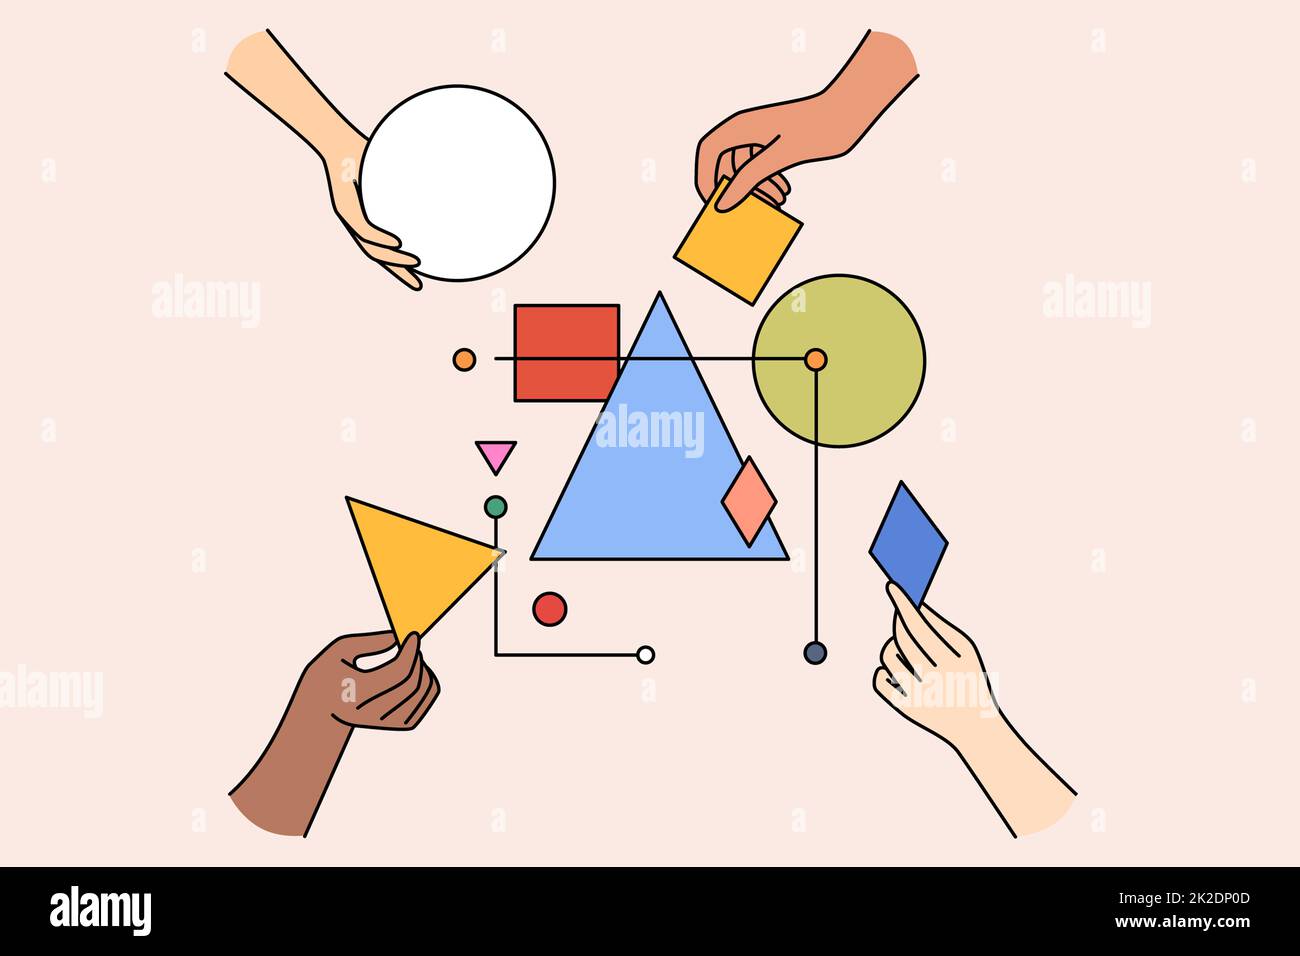 Diverse people team connect geometric shapes Stock Photo